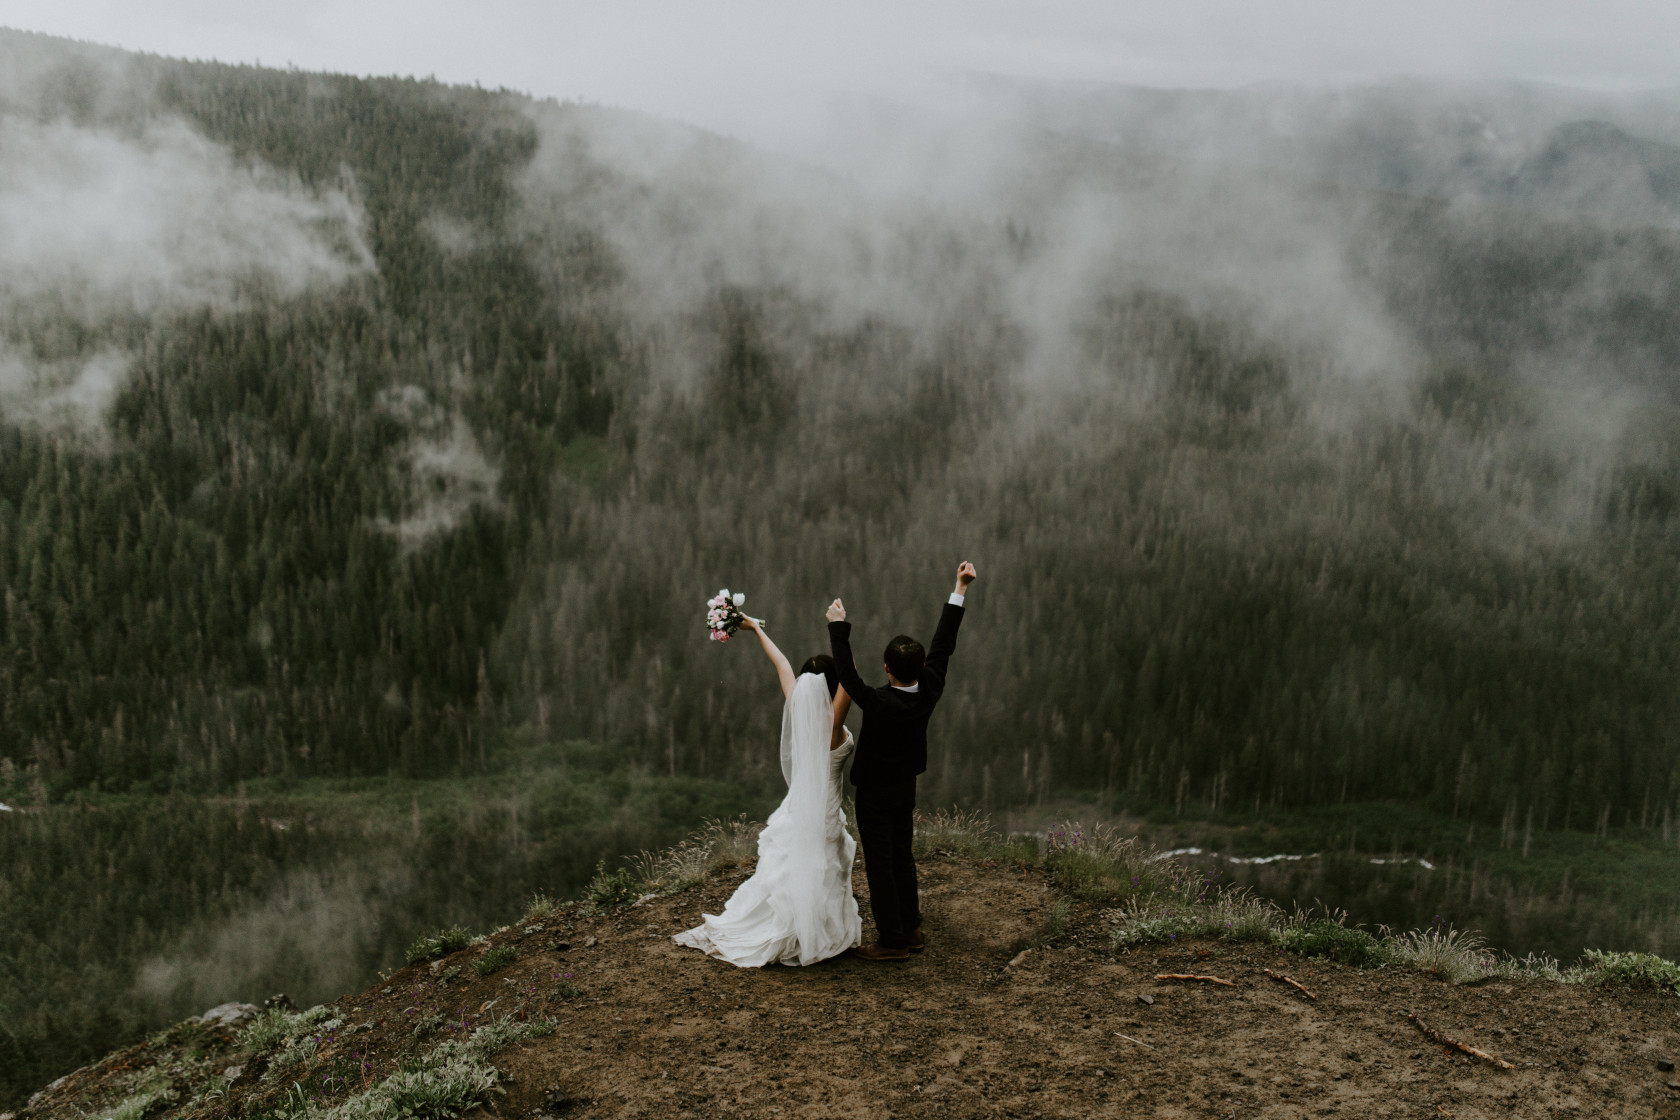 Valerie and Alex share a moment of victory at Mount Hood, OR. Elopement wedding photography at Mount Hood by Sienna Plus Josh.